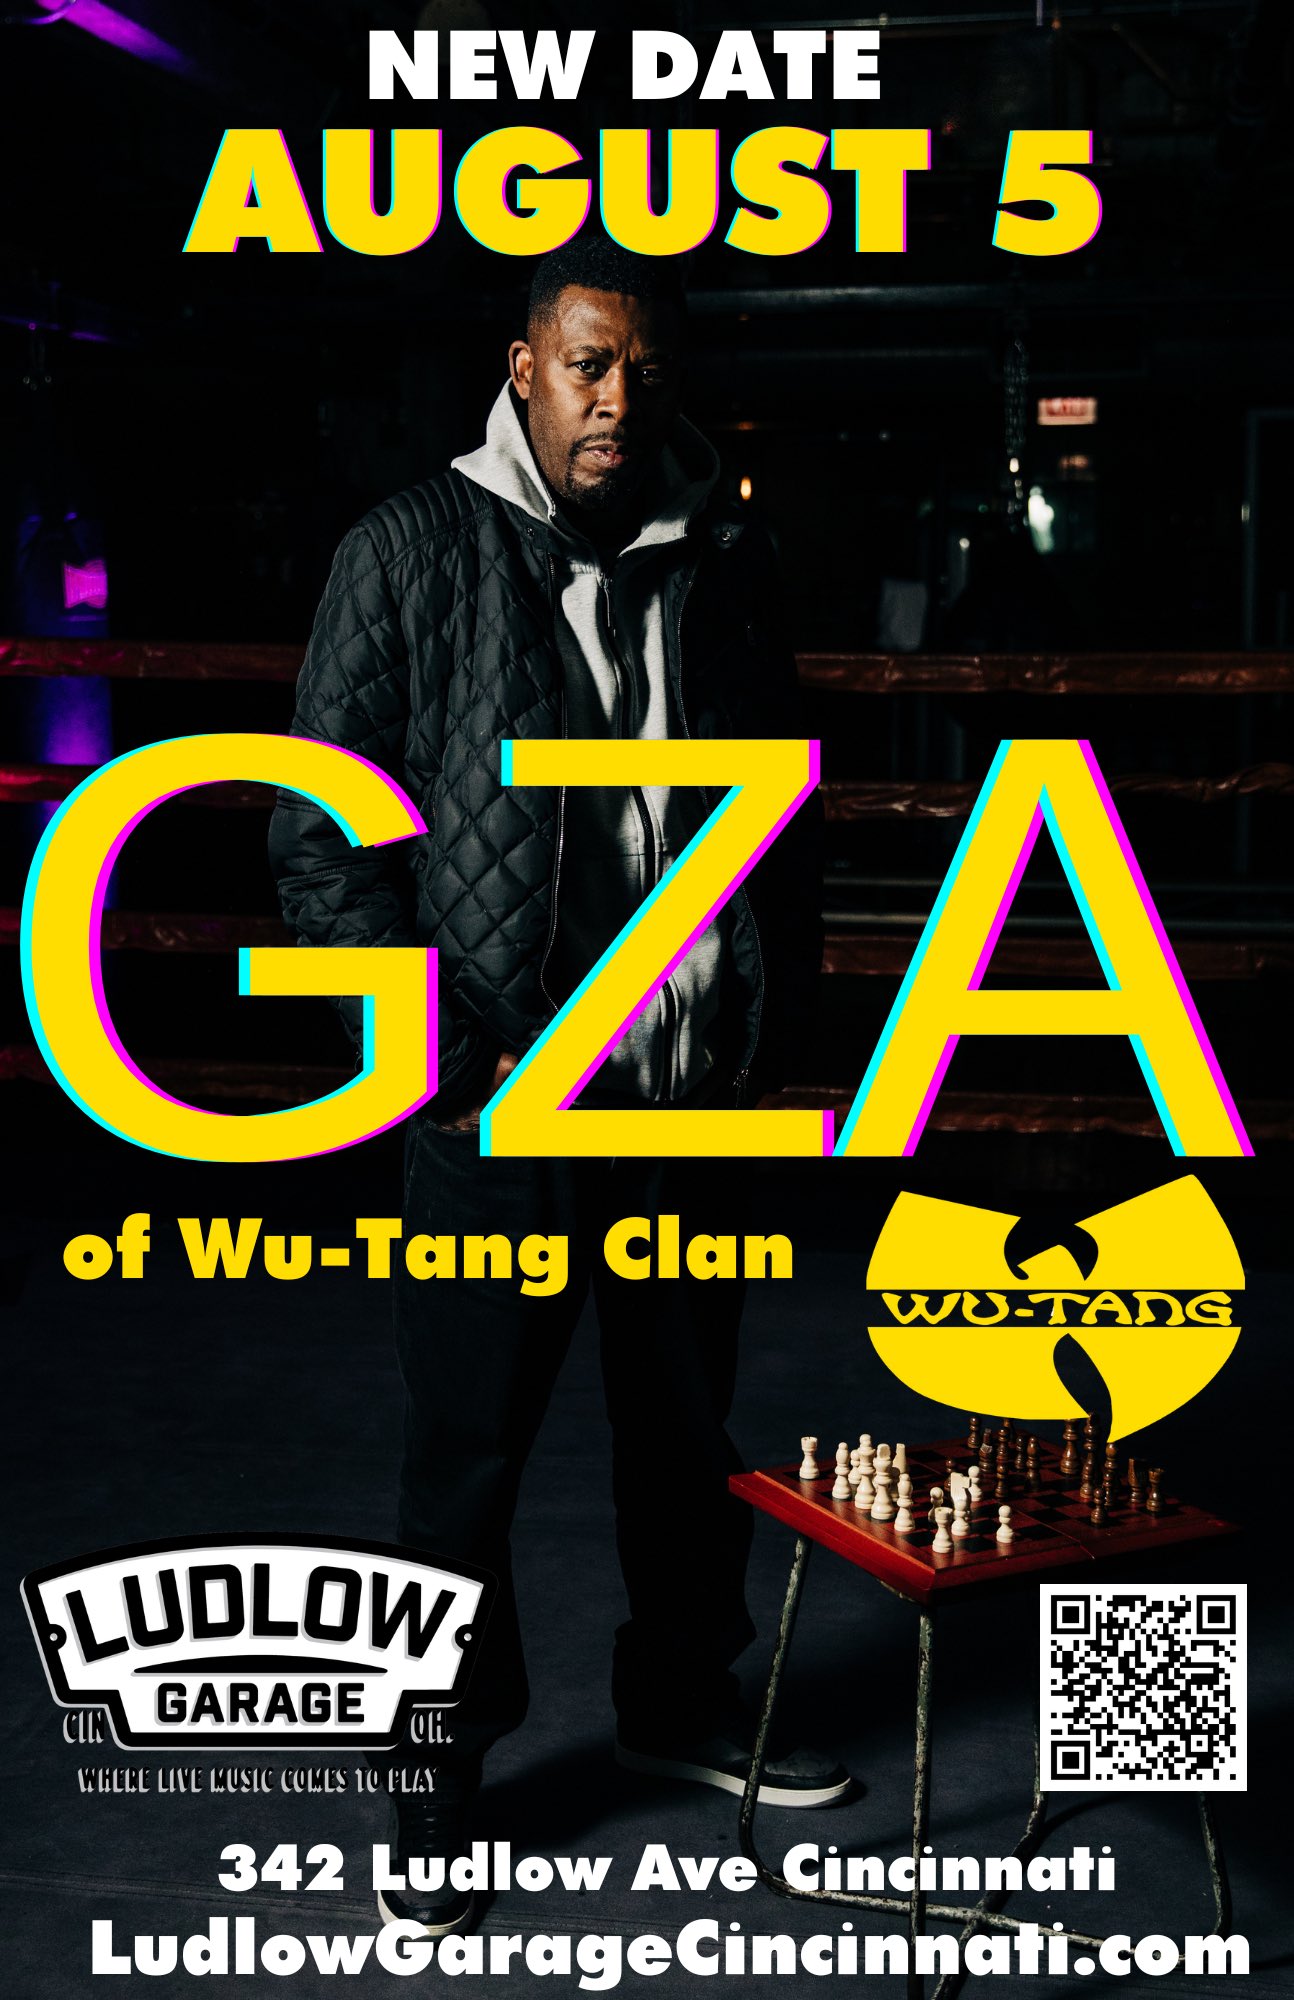 Gza Chess Boxing Match in Oakland at Yoshi's Oakland